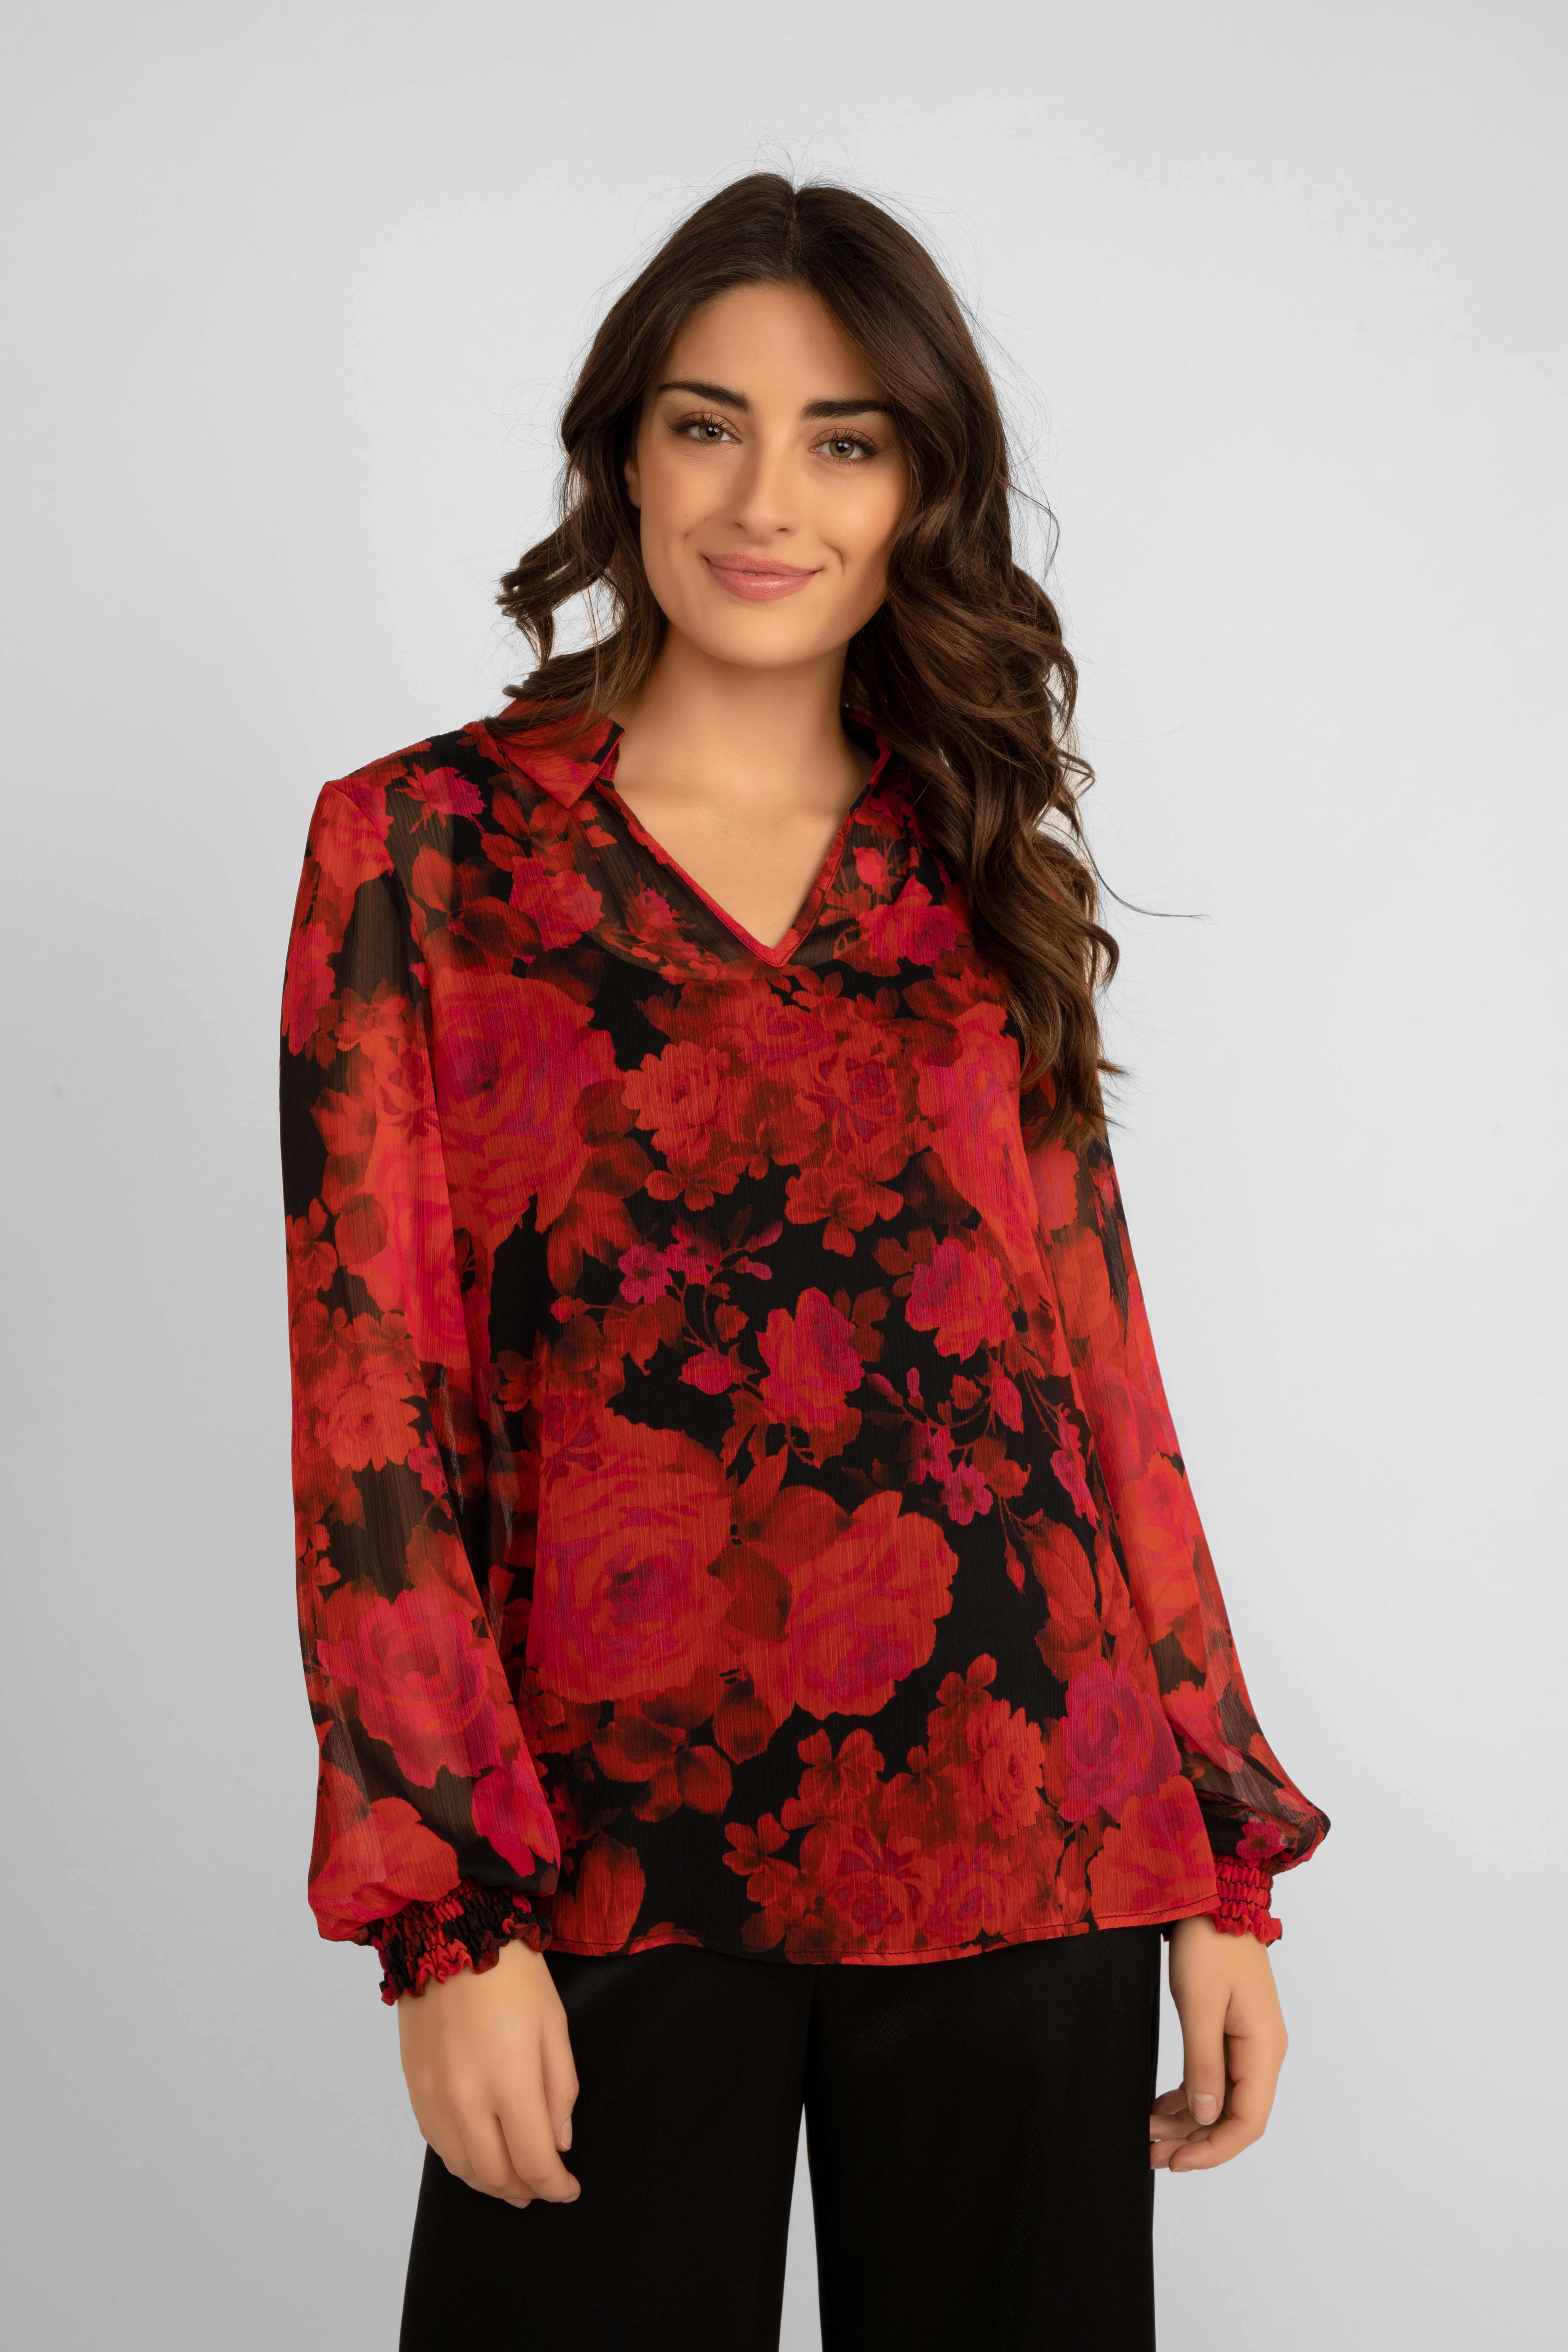 FRANK LYMAN - Sheer Floral Print Open Front Cardigan - Women's Clothing & Accessories 